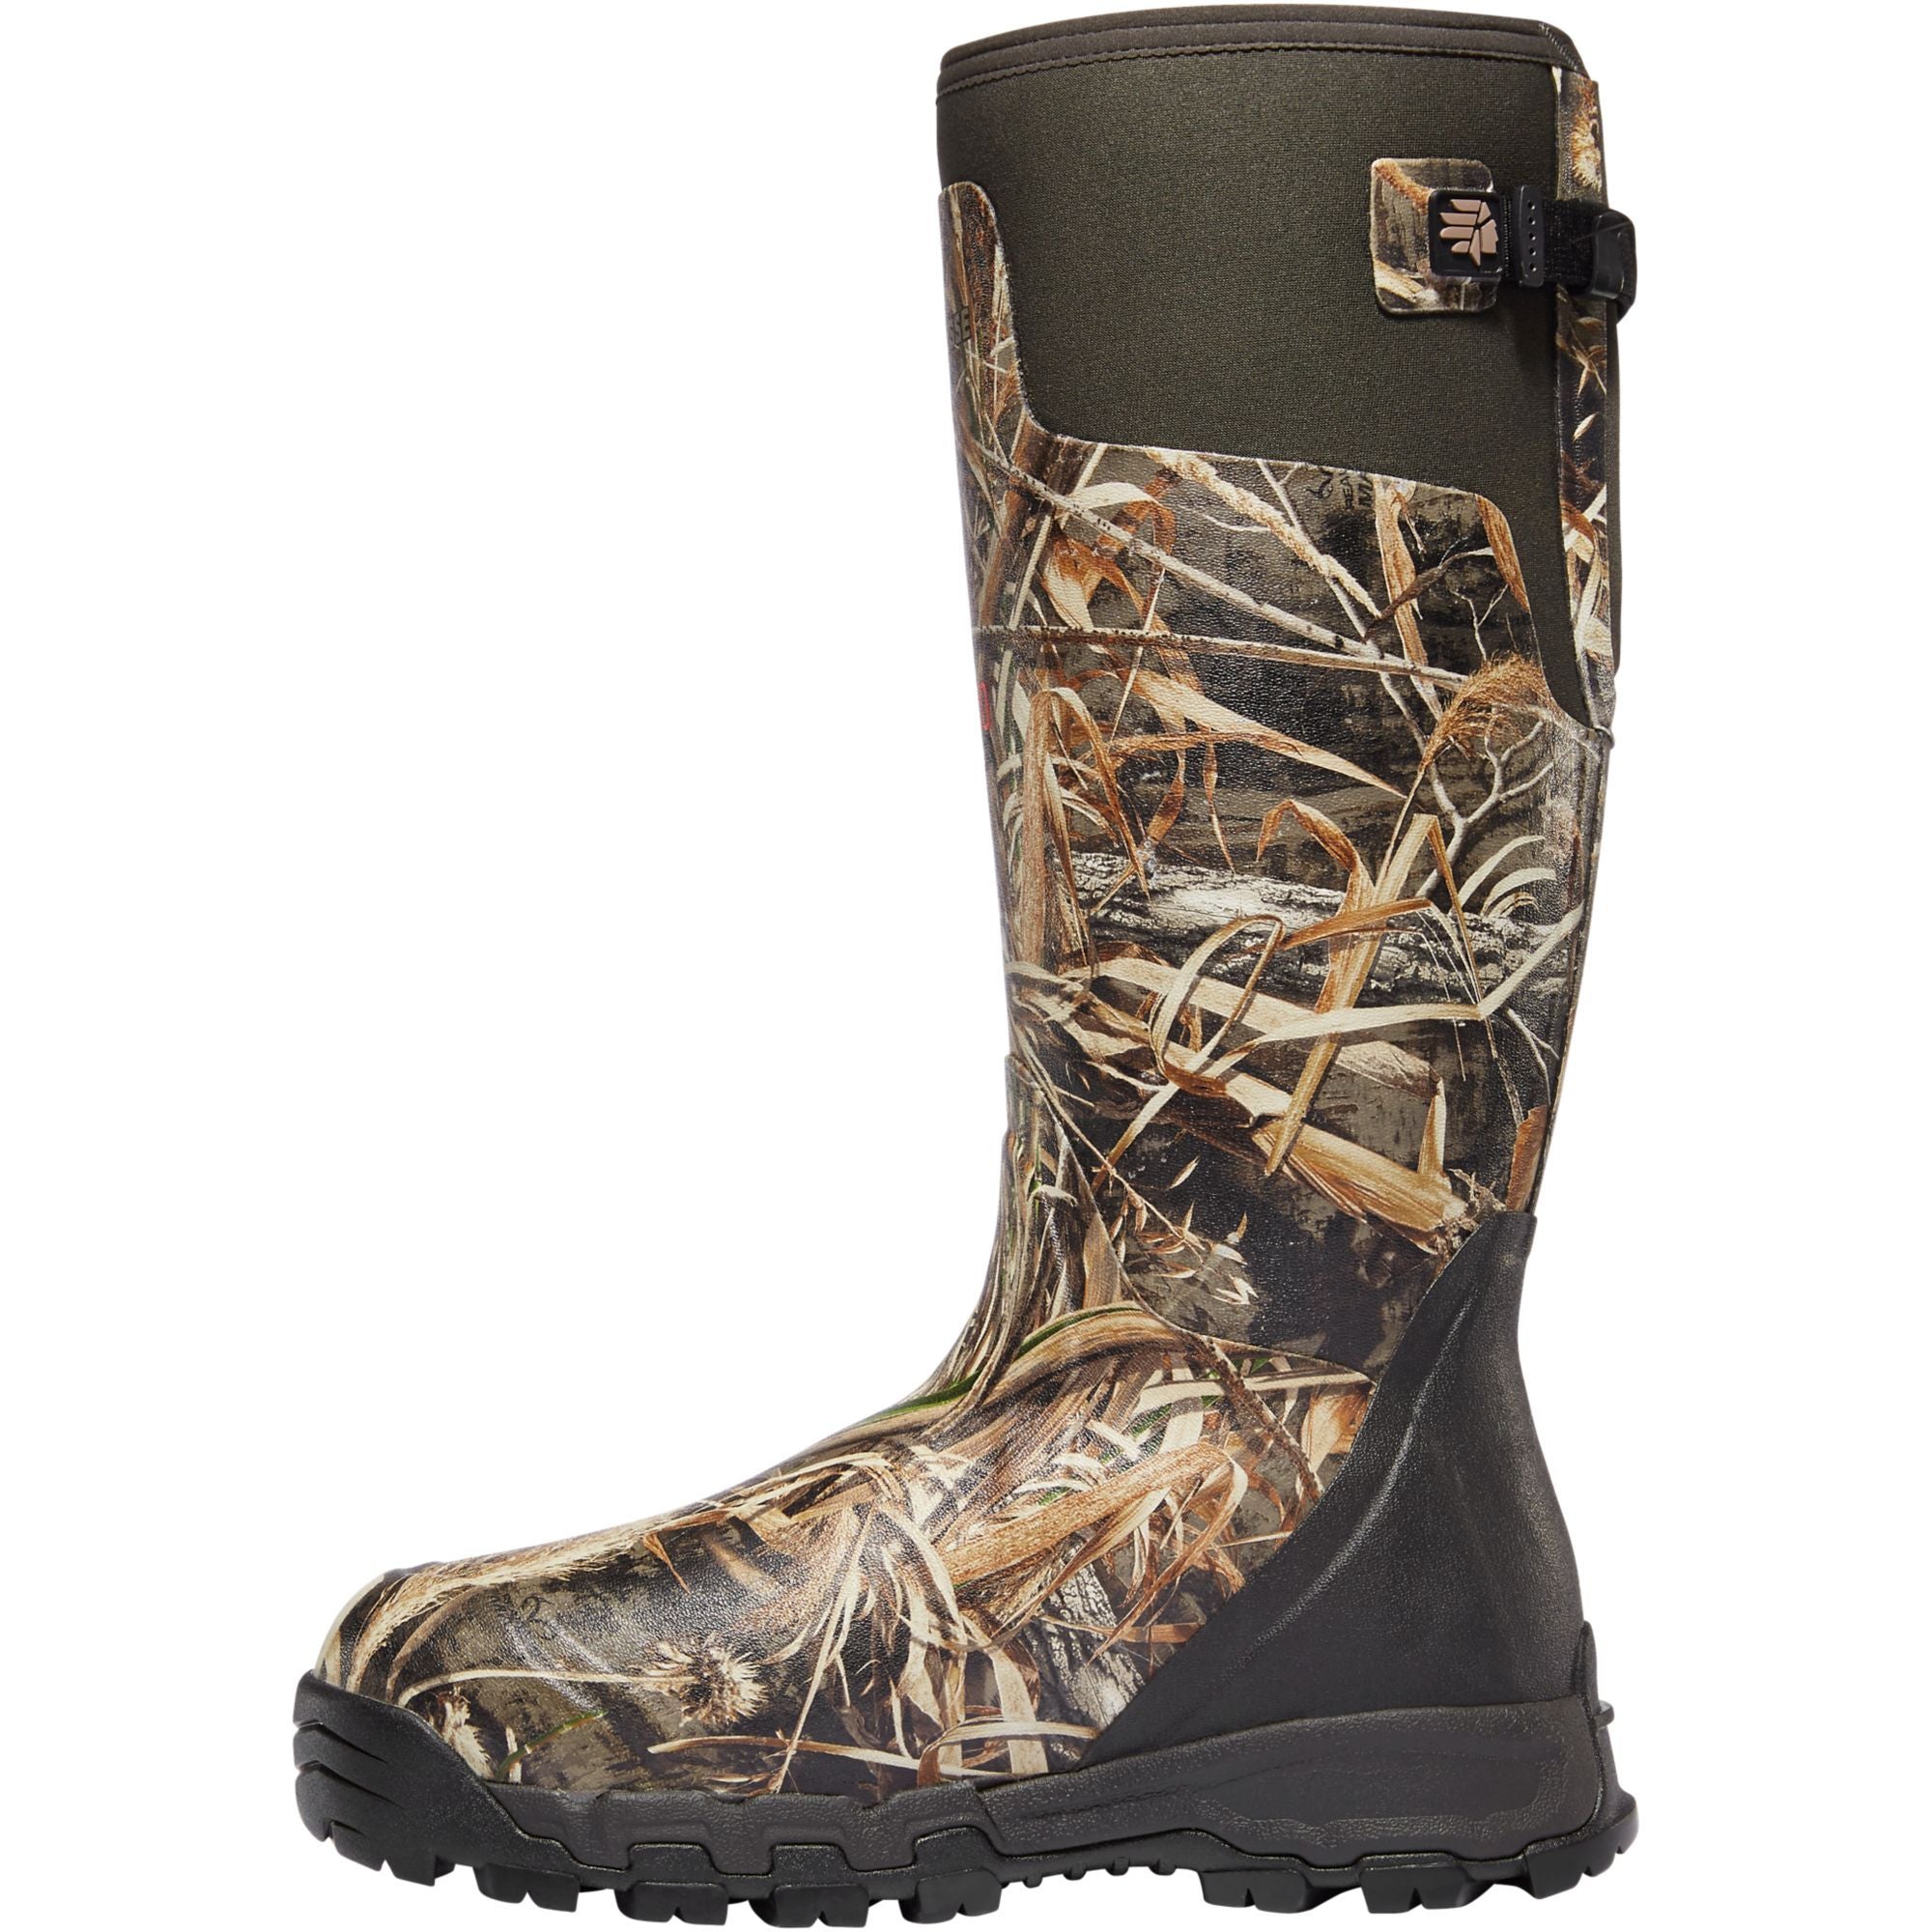 LaCrosse Men's Alphaburly Pro 18" Insulated Rubber Hunt Boot - 376021  - Overlook Boots